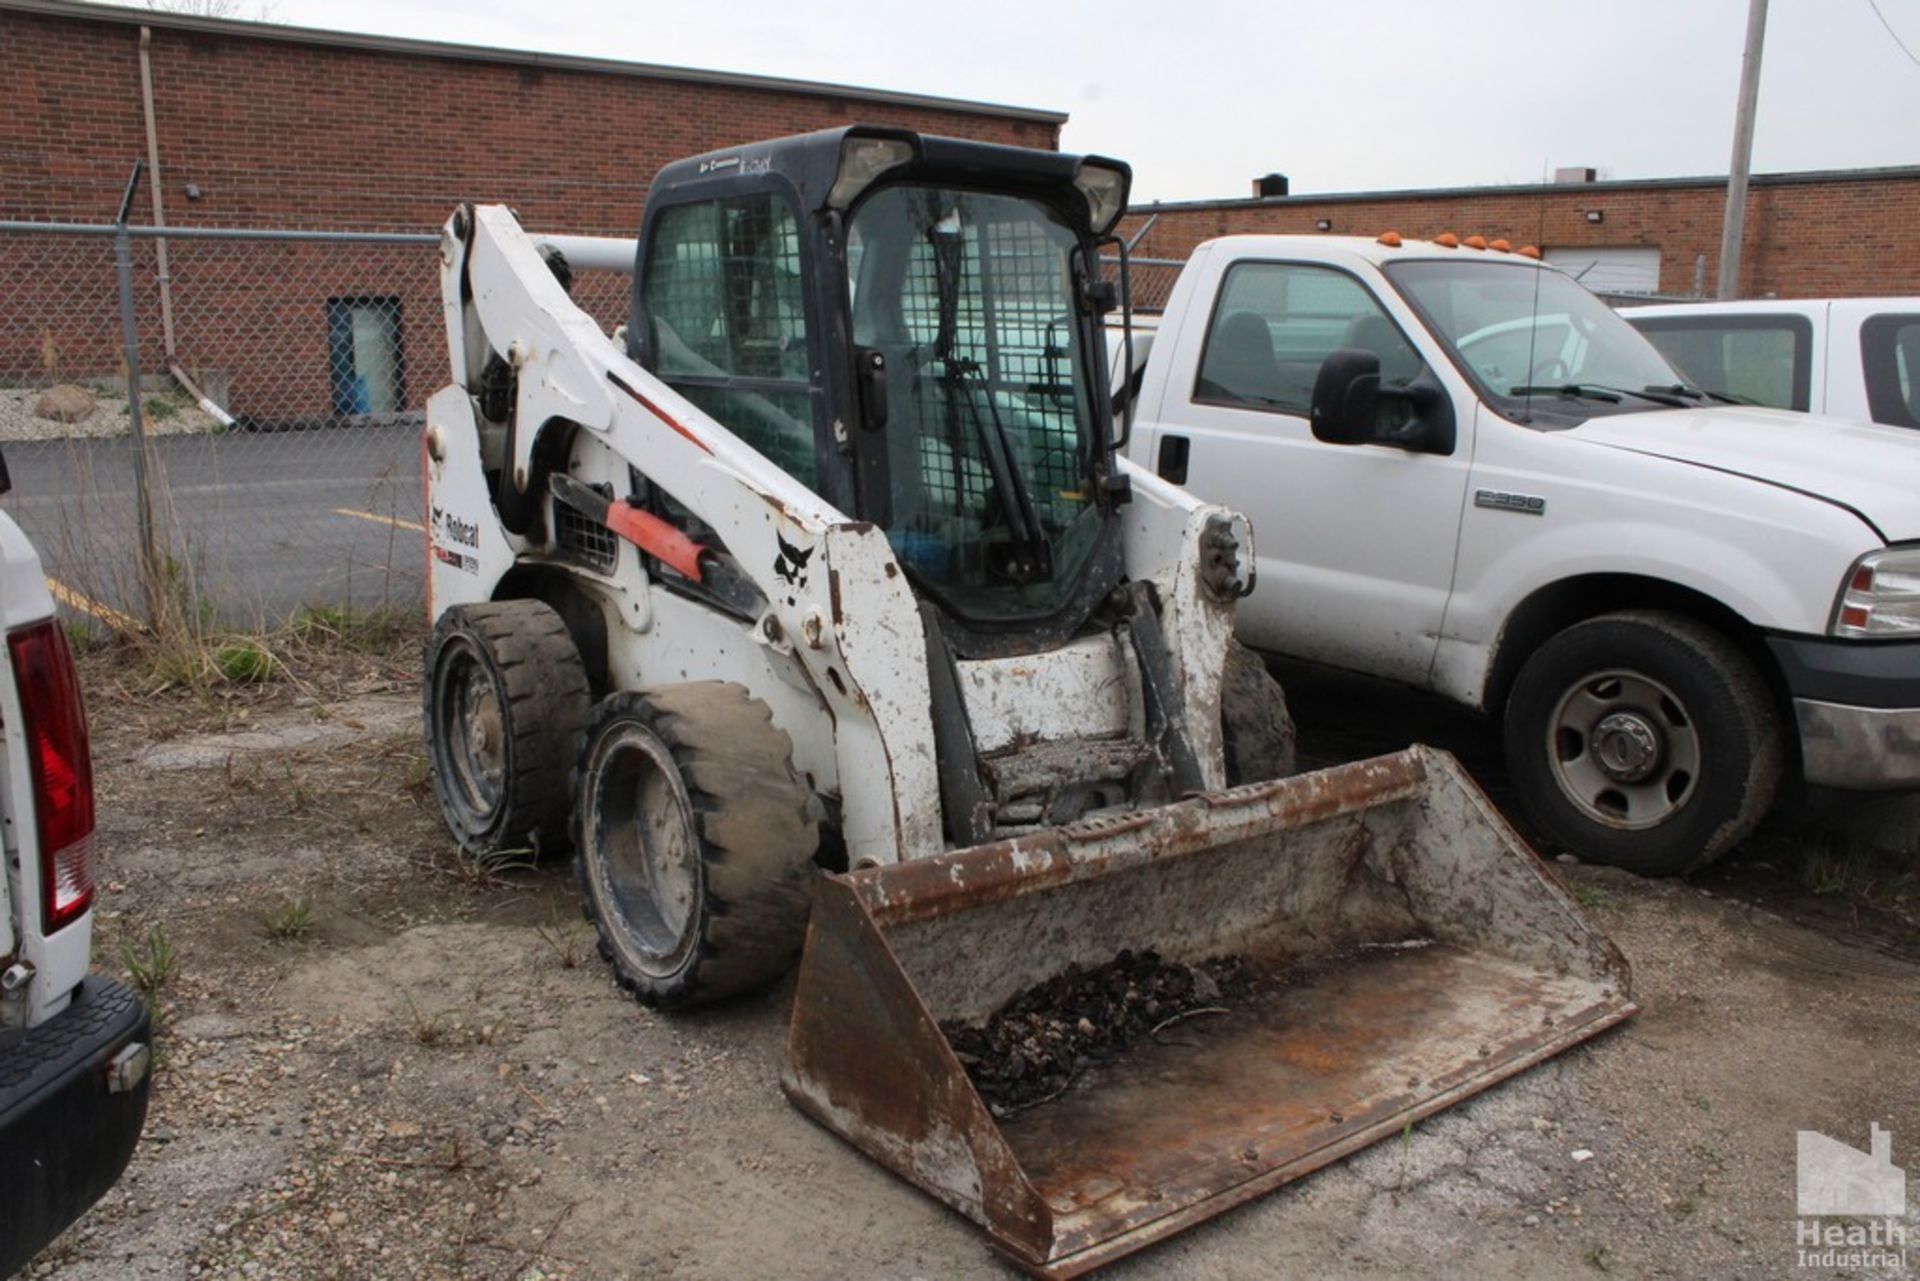 BOBCAT S750 SKID LOADER, 5,371 HOURS ON METER, SOLID TIRES, TRI-PIPE AUXILLARY HYDRAULICS, HYDRAULI - Image 2 of 8